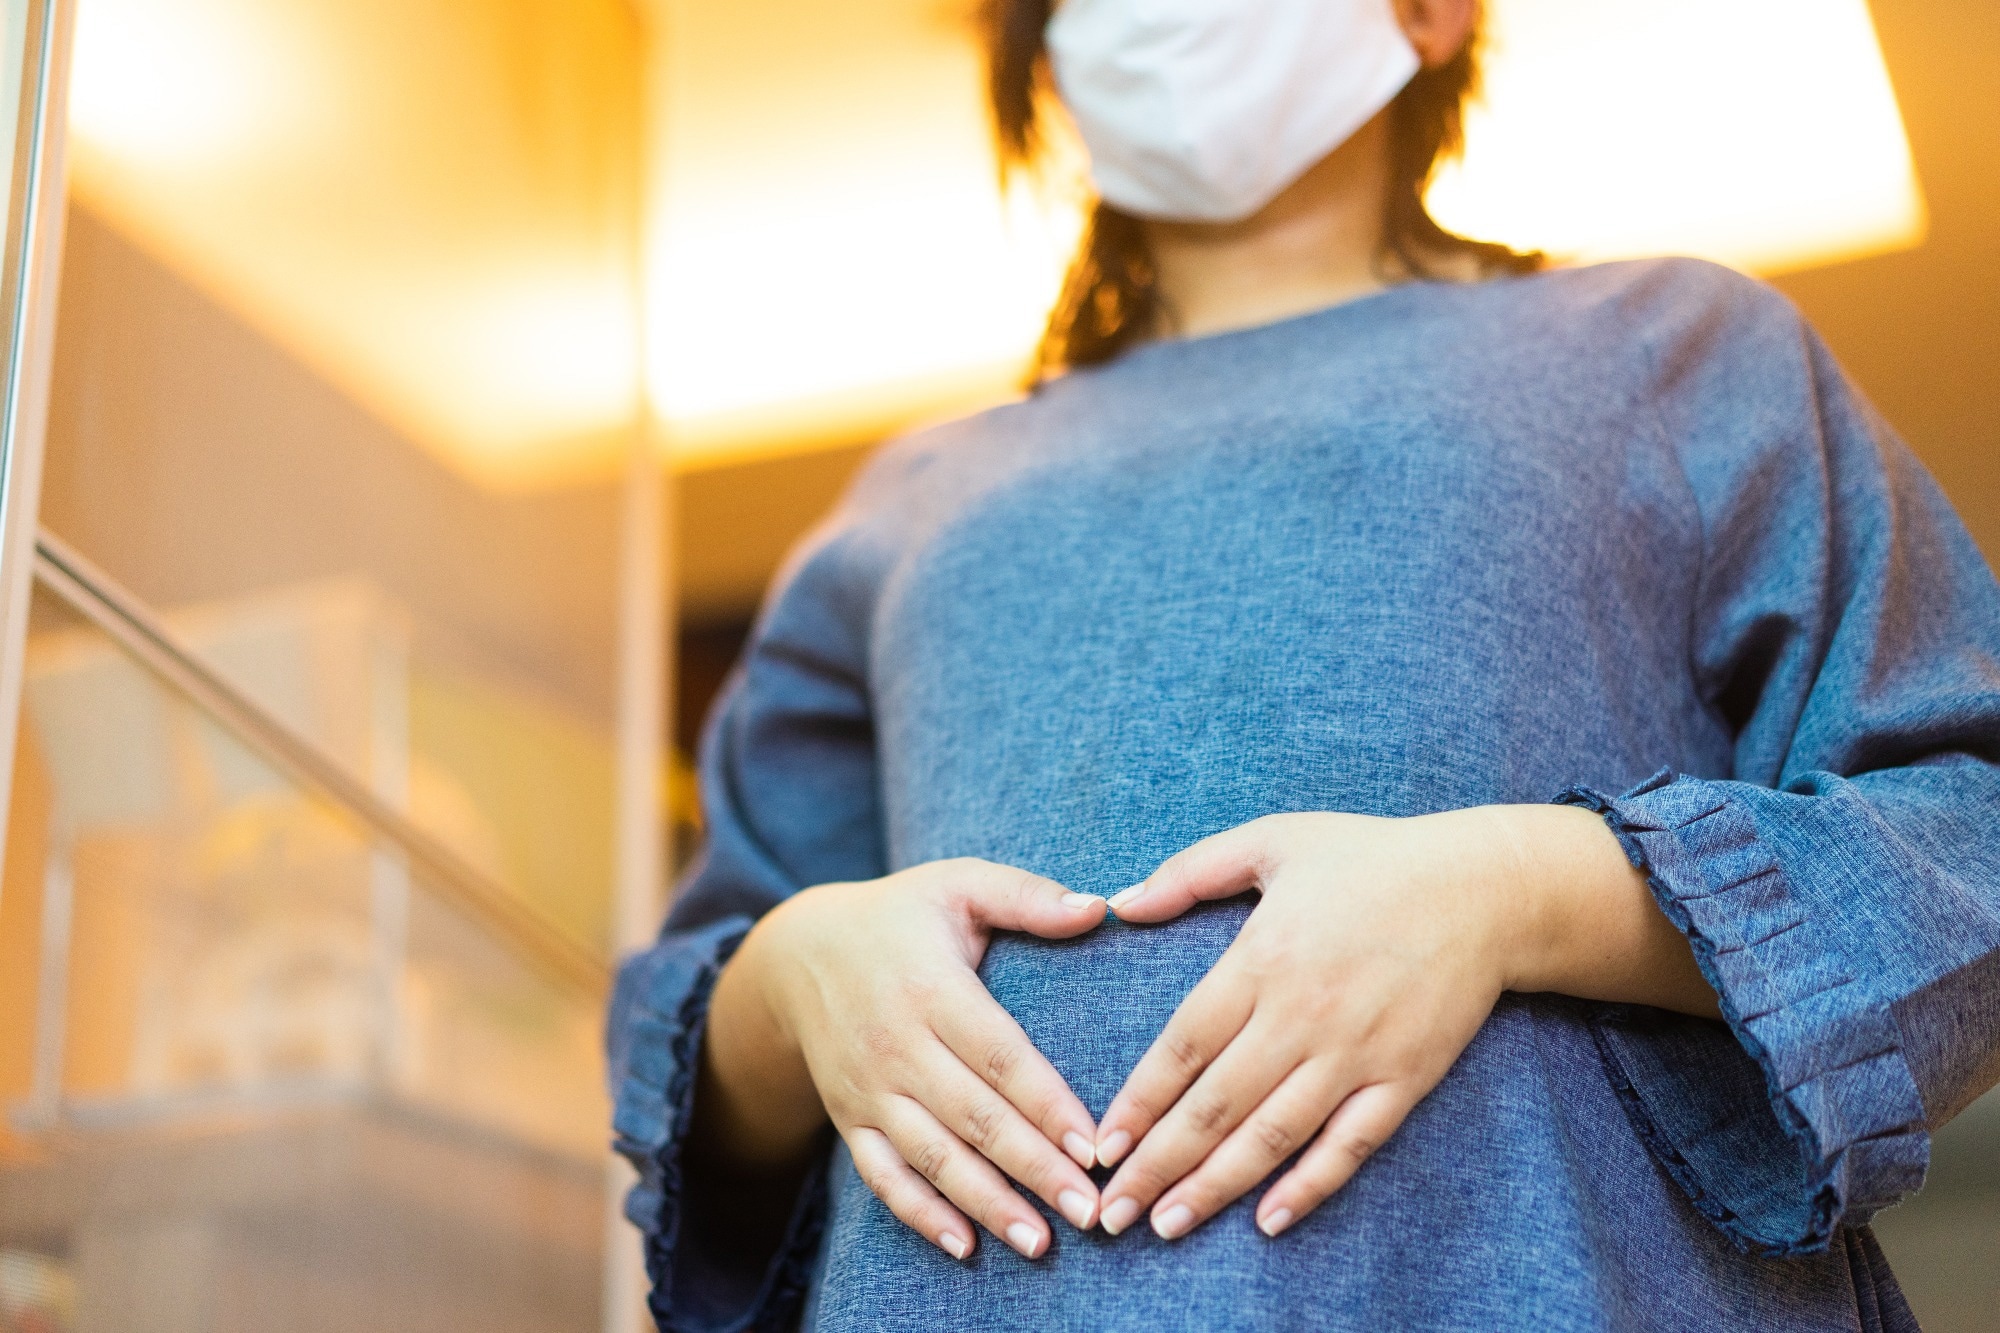 Study: Single-cell RNA sequencing reveals immunological rewiring at the maternal-fetal interface after asymptomatic/mild SARS-CoV-2 infection.  Image Credit: MIA Studio/Shutterstock